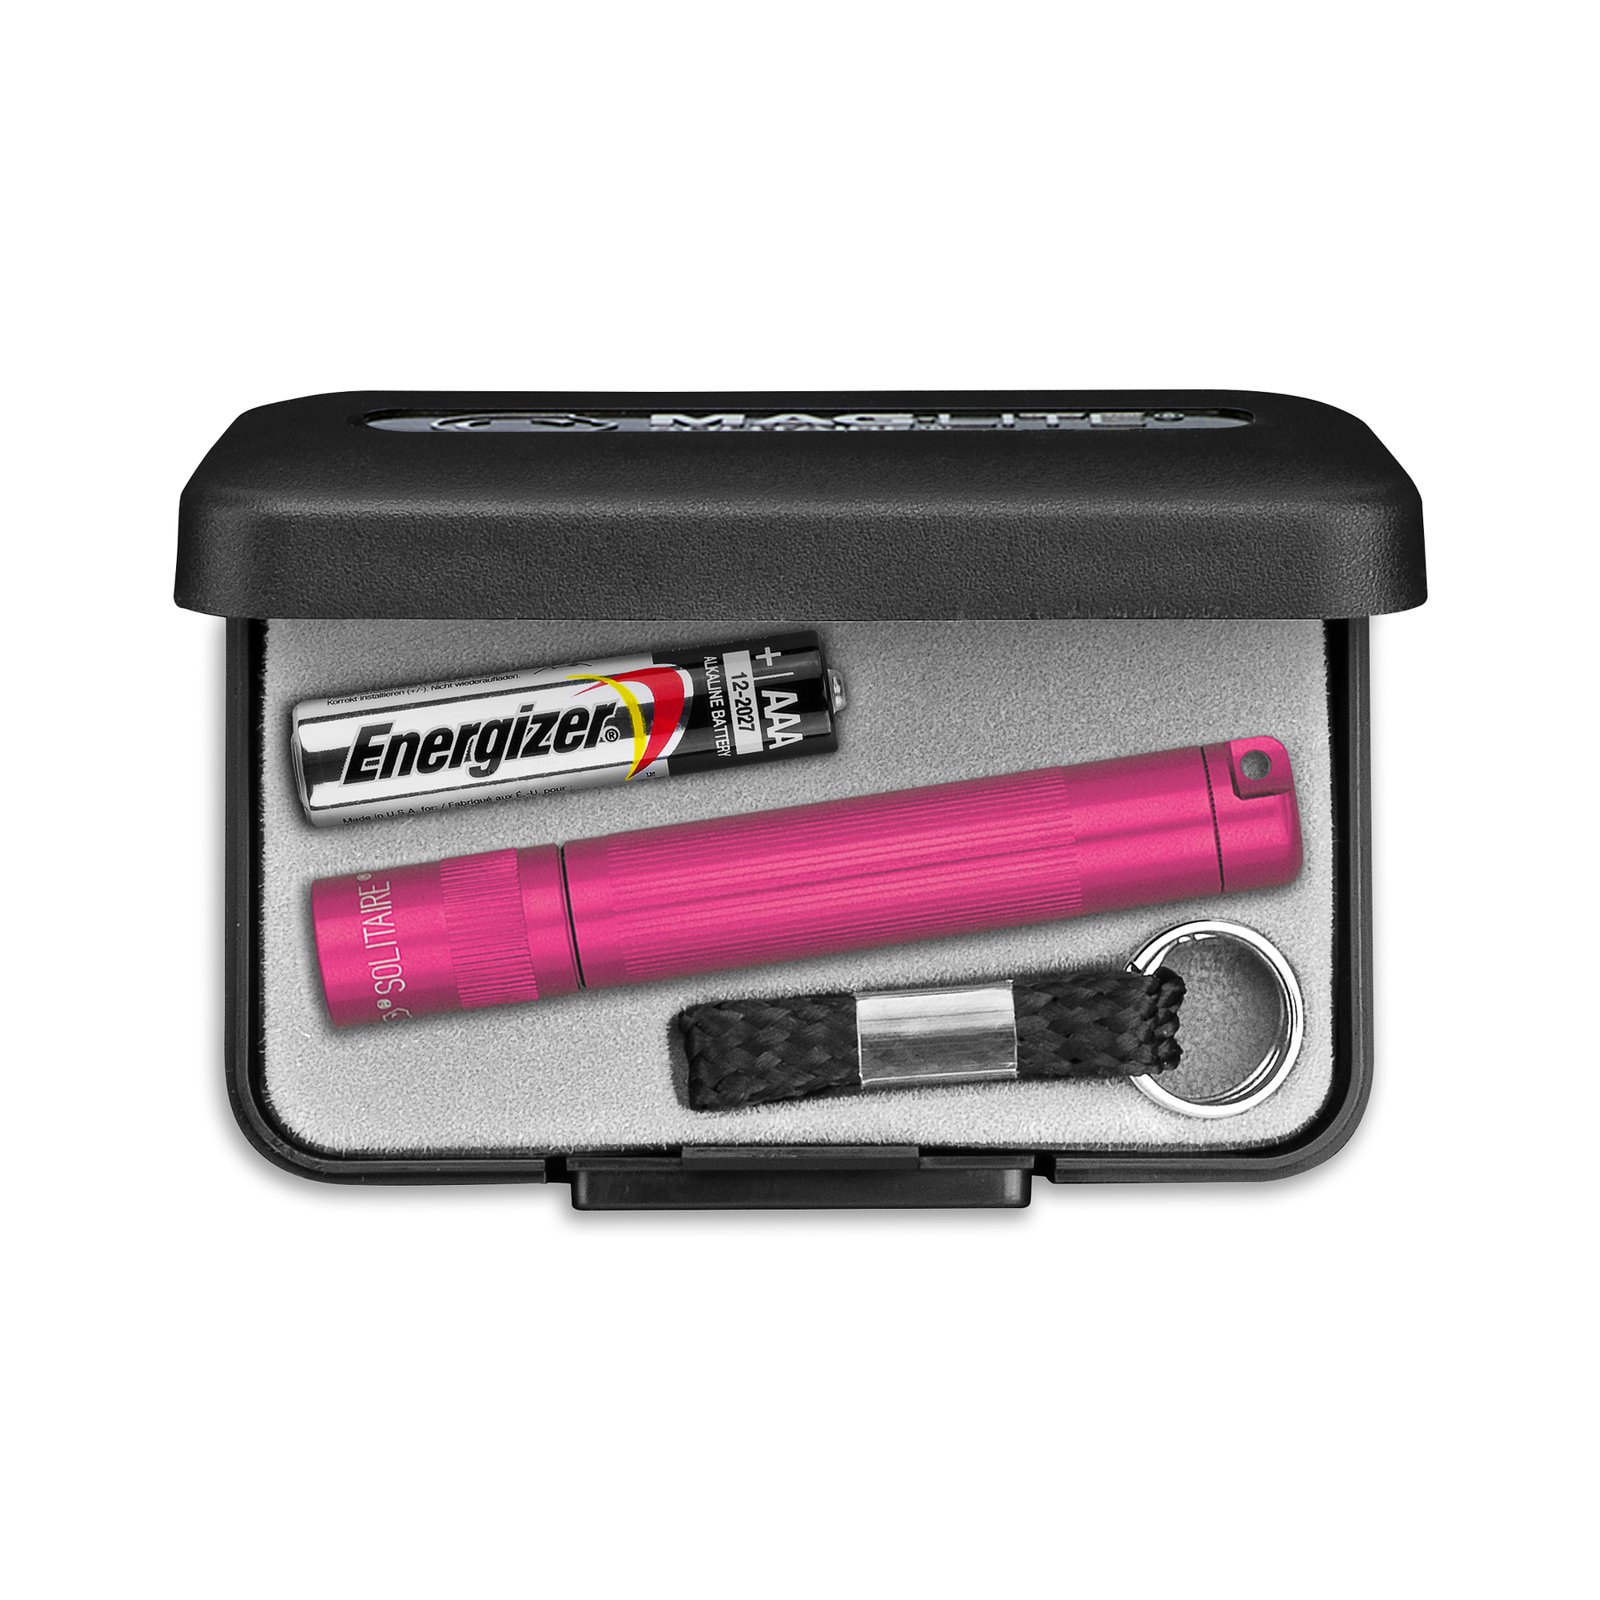 Maglite Xenon-Taschenlampe Solitaire 1-Cell AAA, Box, pink